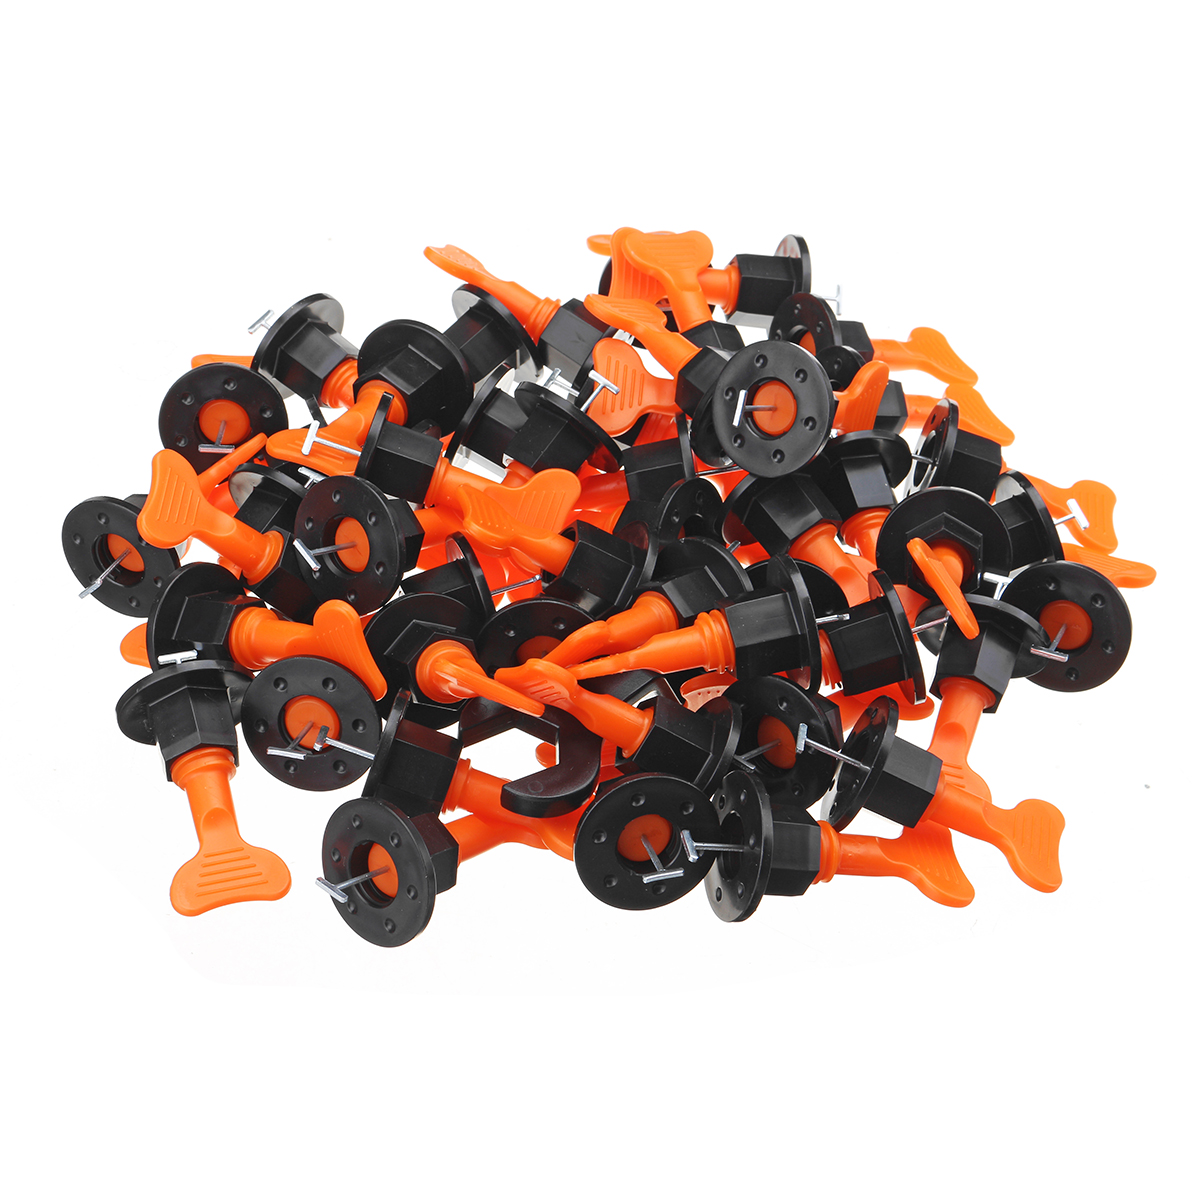 4050100Pcs-Tile-Leveling-System-Floor-Kit-Alignment-Clip-Reusable-Spacers-Locator-W-Wrench-1623252-3